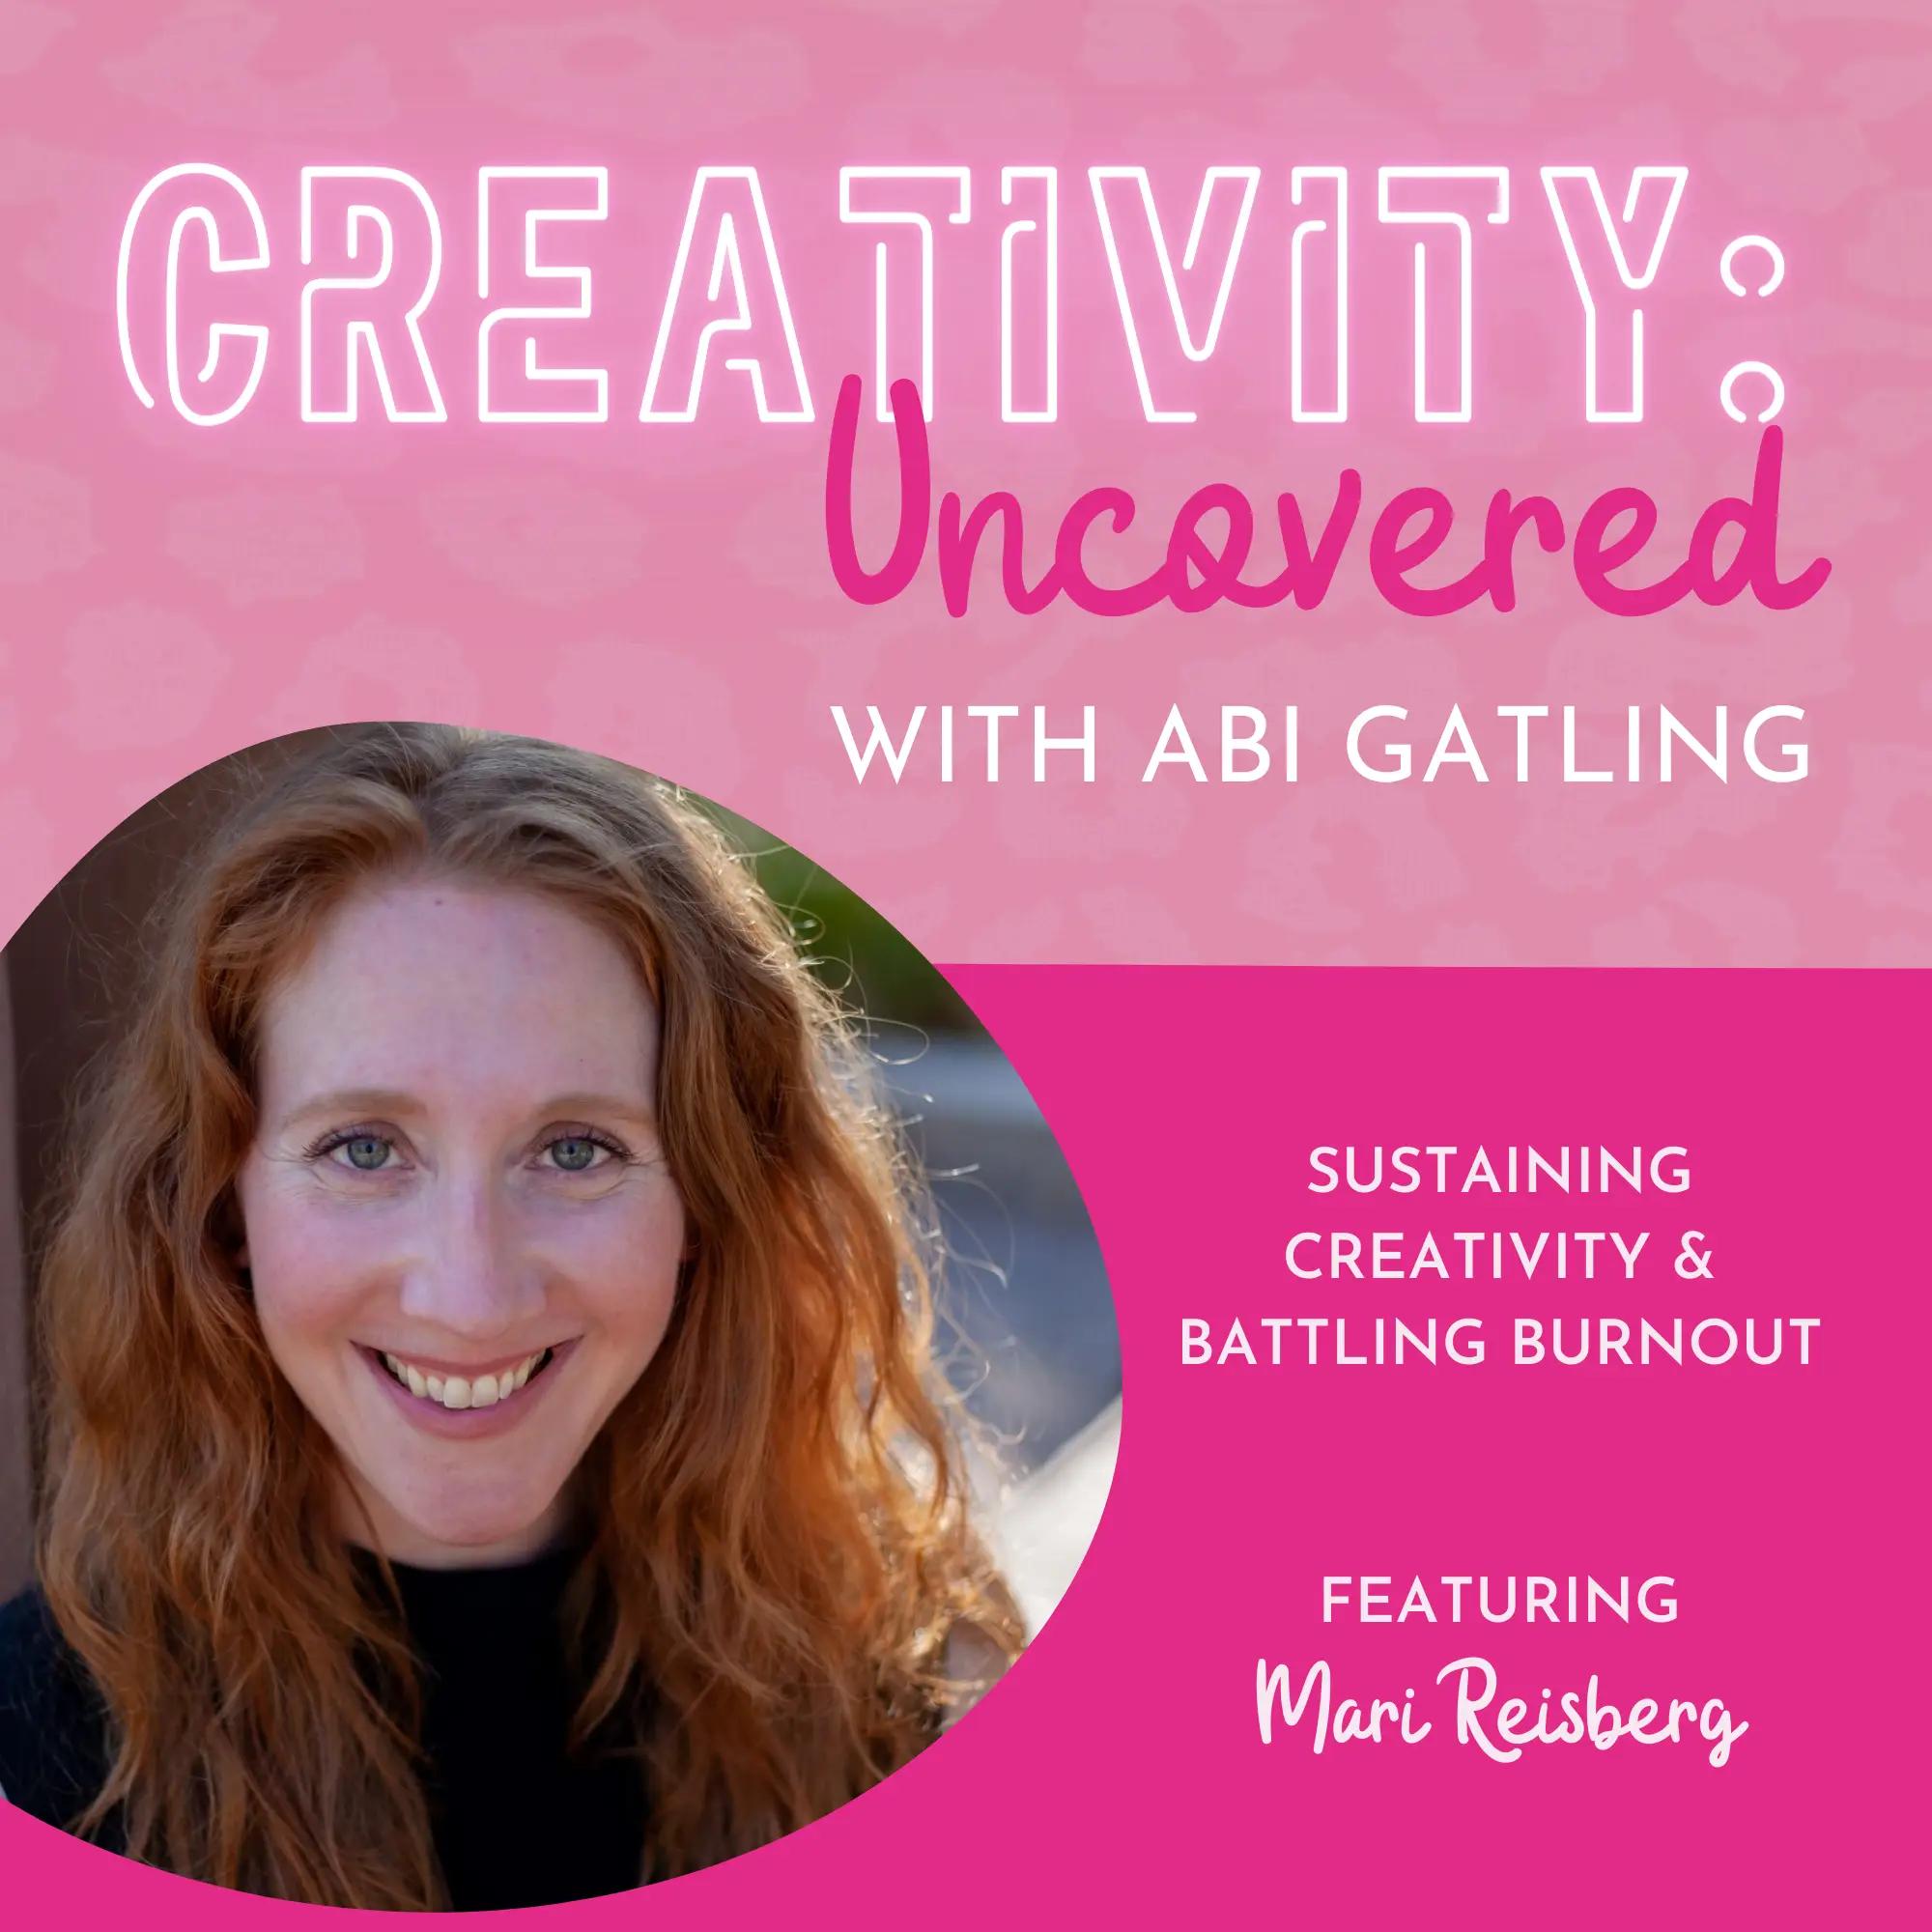 Creativity: Uncovered podcast episode graphic featuring guest Mari Reisberg